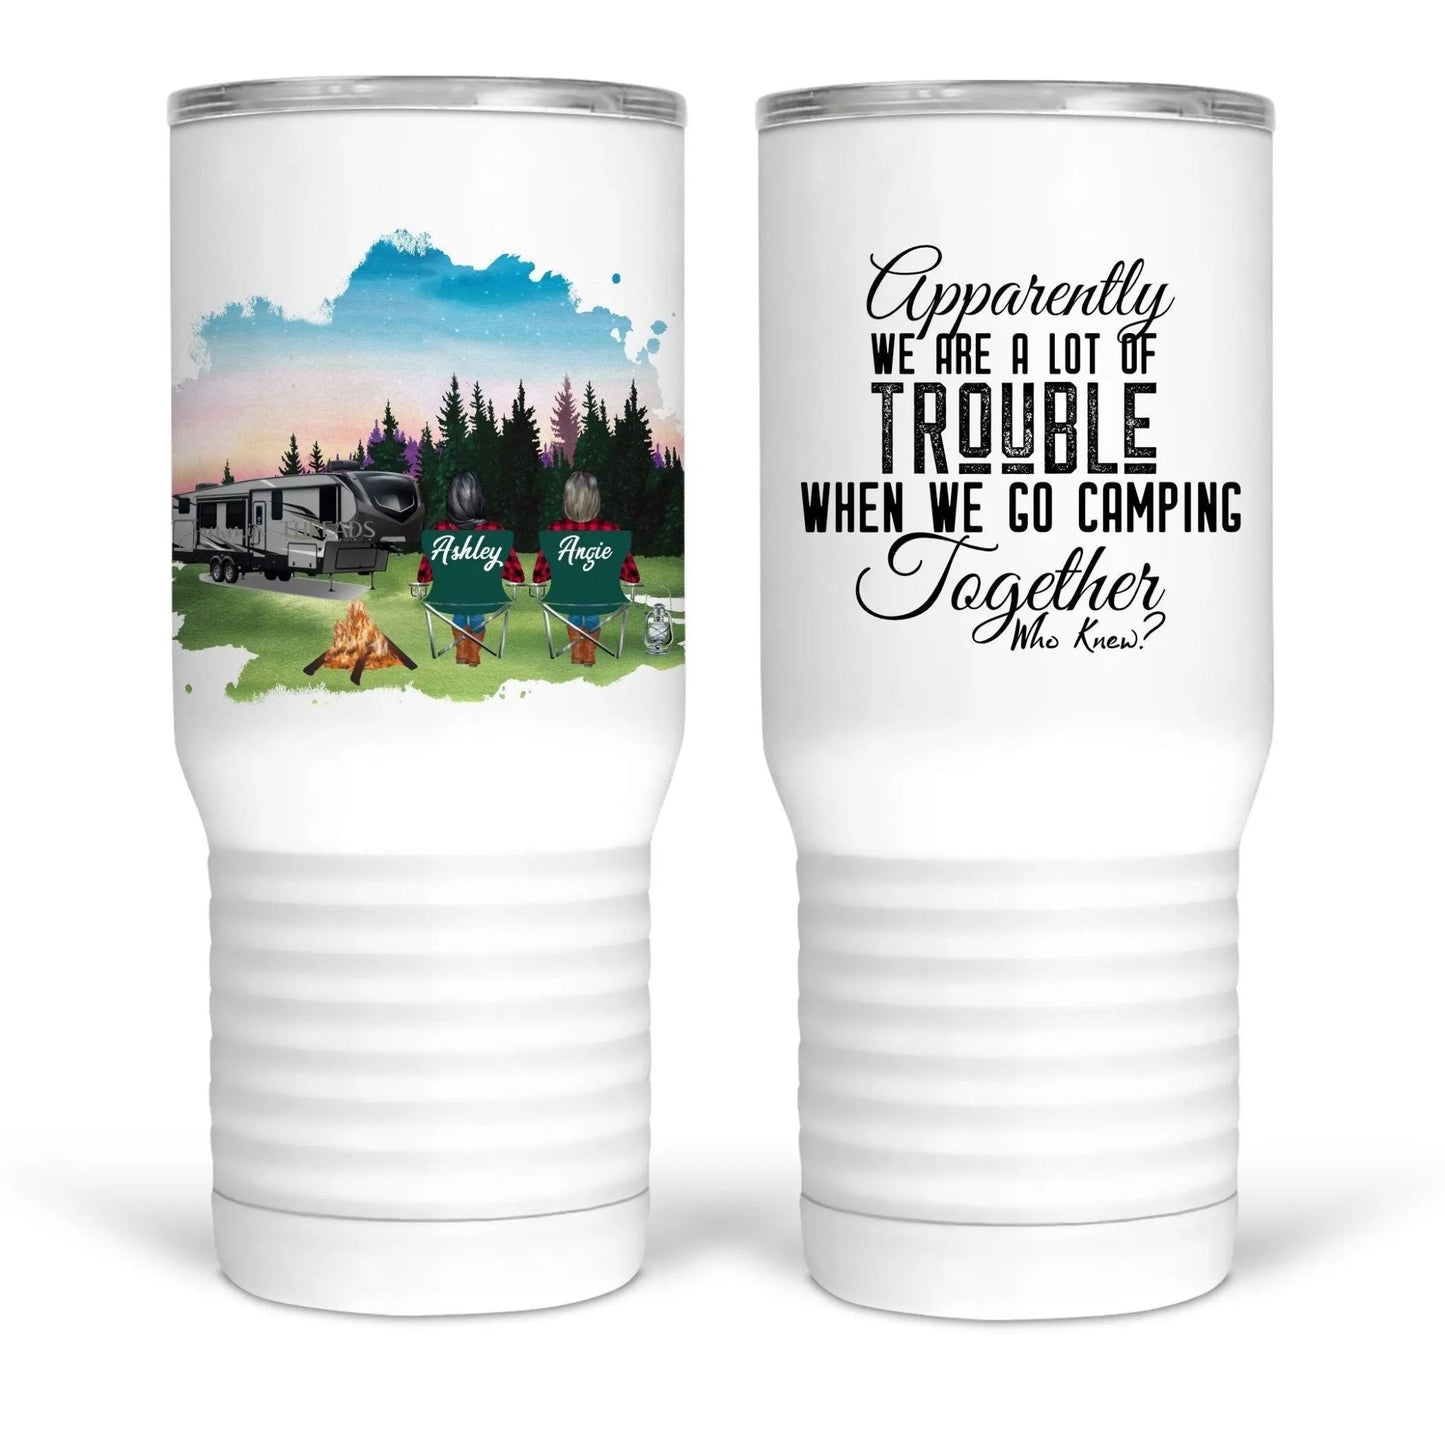 Apparently we are a lot of trouble when we go camping together - Funny camping mugs by Jammin' Threads